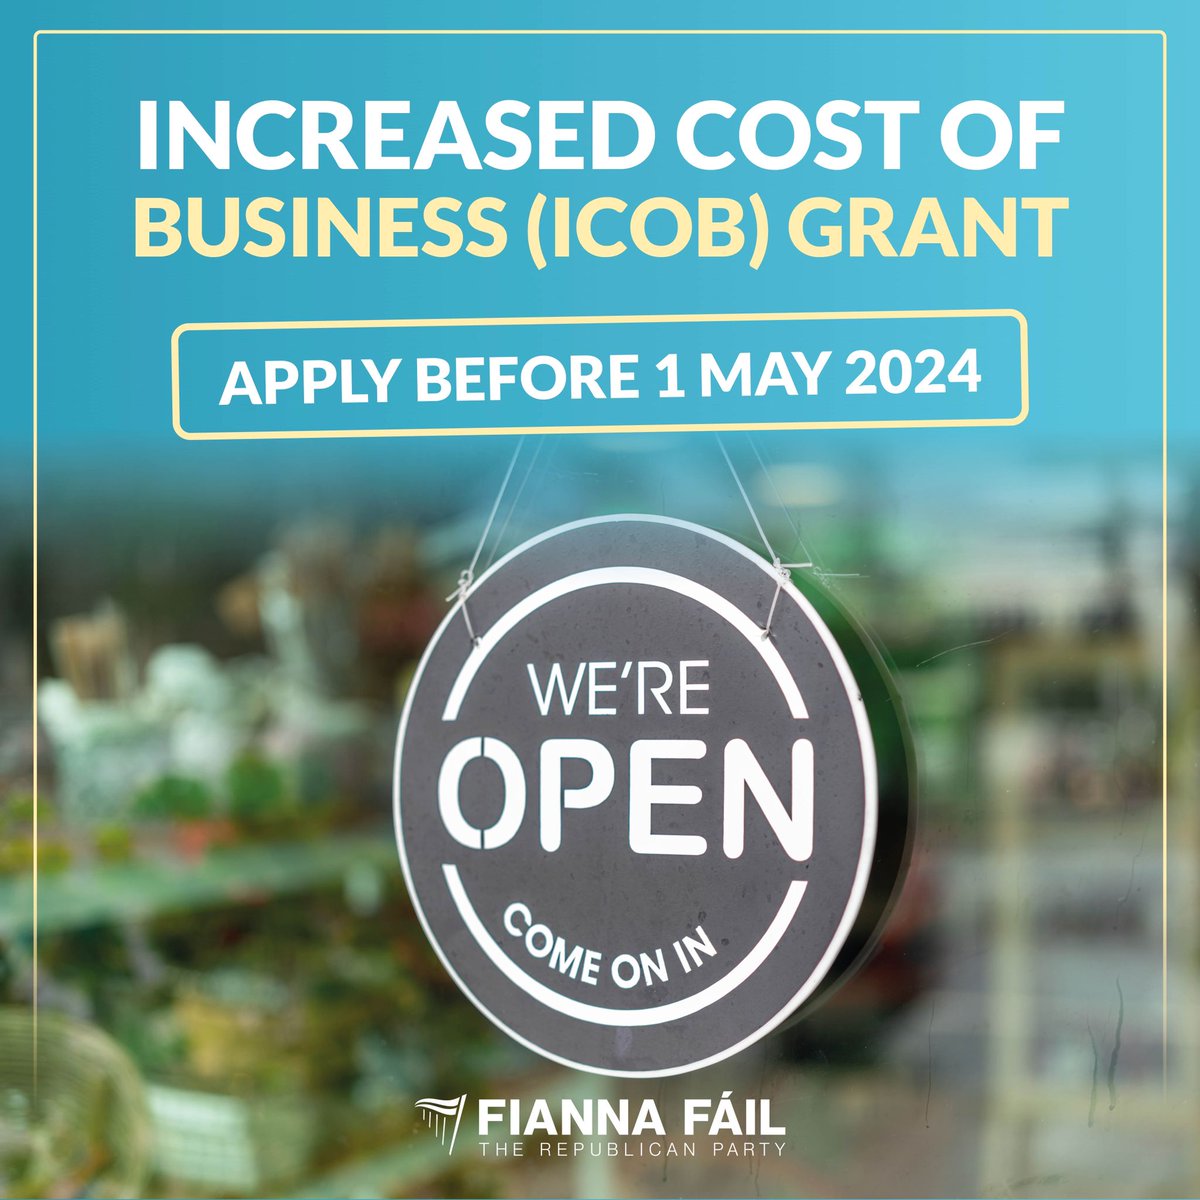 Encouraging all eligible business owners to apply for the Increased Cost of Business grant worth €5,000 before May 1 deadline. This scheme is designed to help those businesses who need it most to meet their increased costs. The grants are available through local authorities.